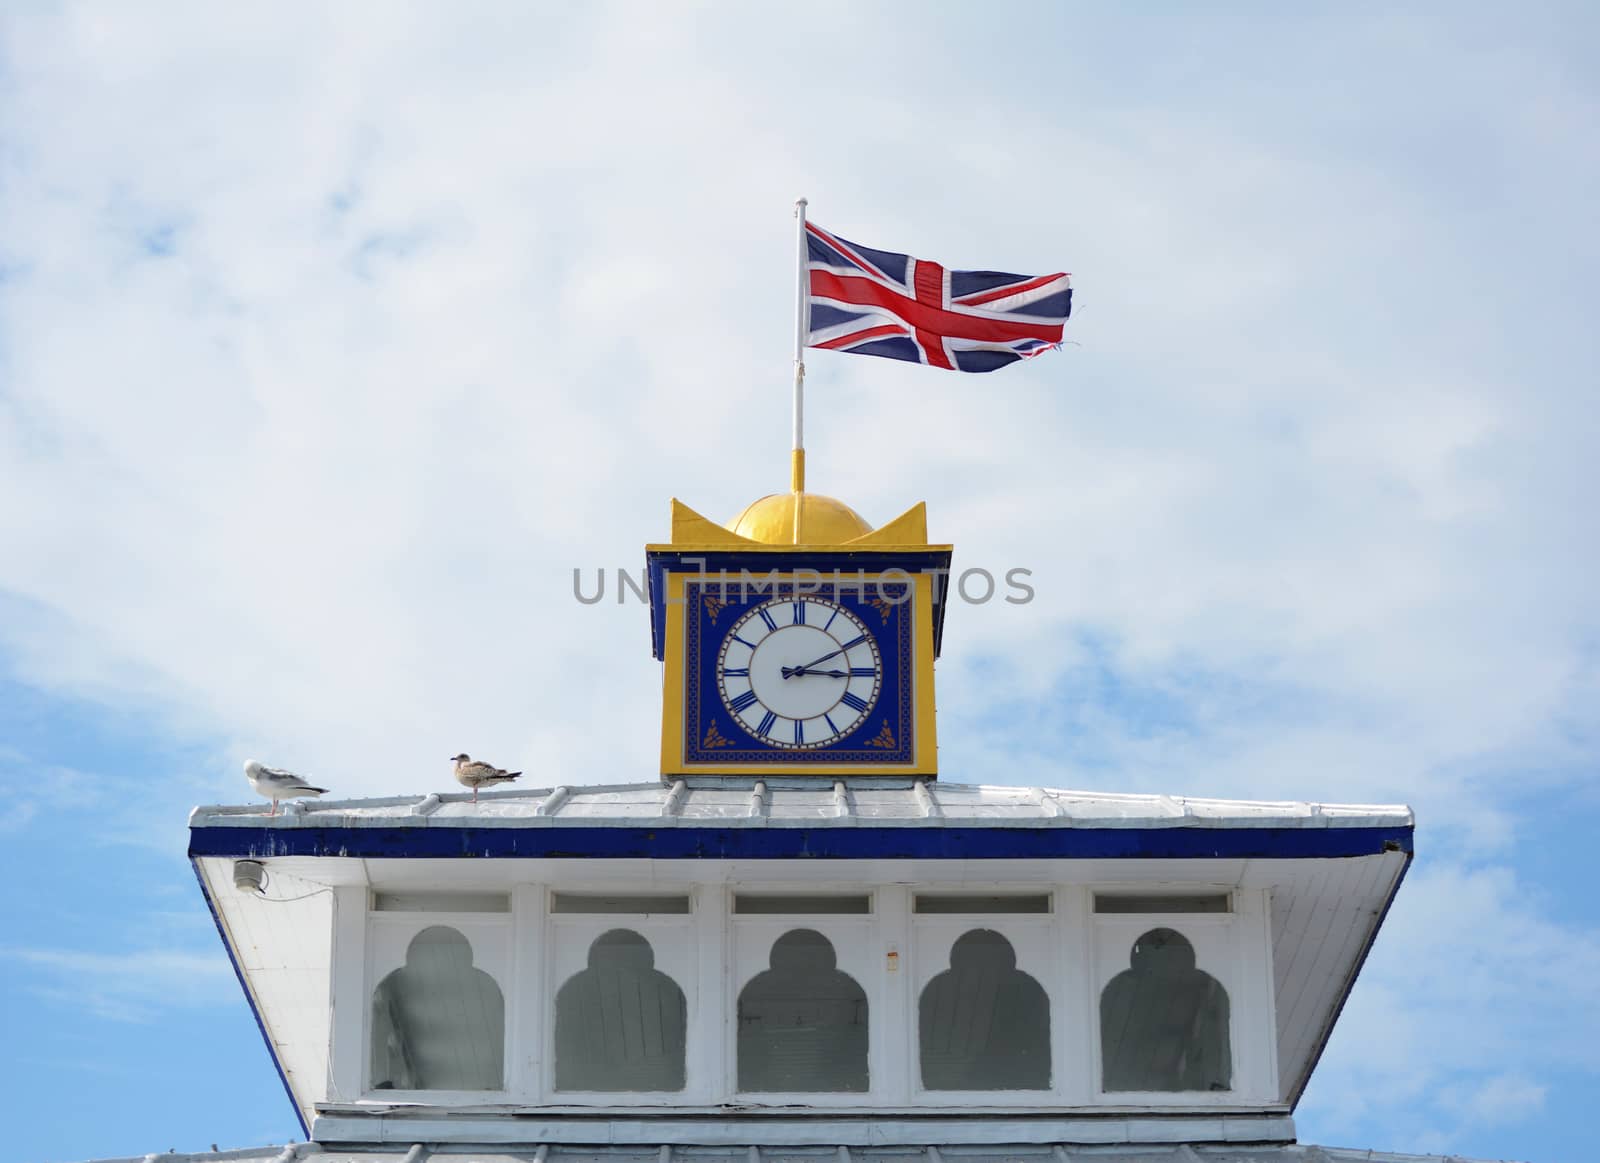 The Union Jack flag flies atop the clock tower of Eastbourne pier. Gulls sit on the roof in sunshine.